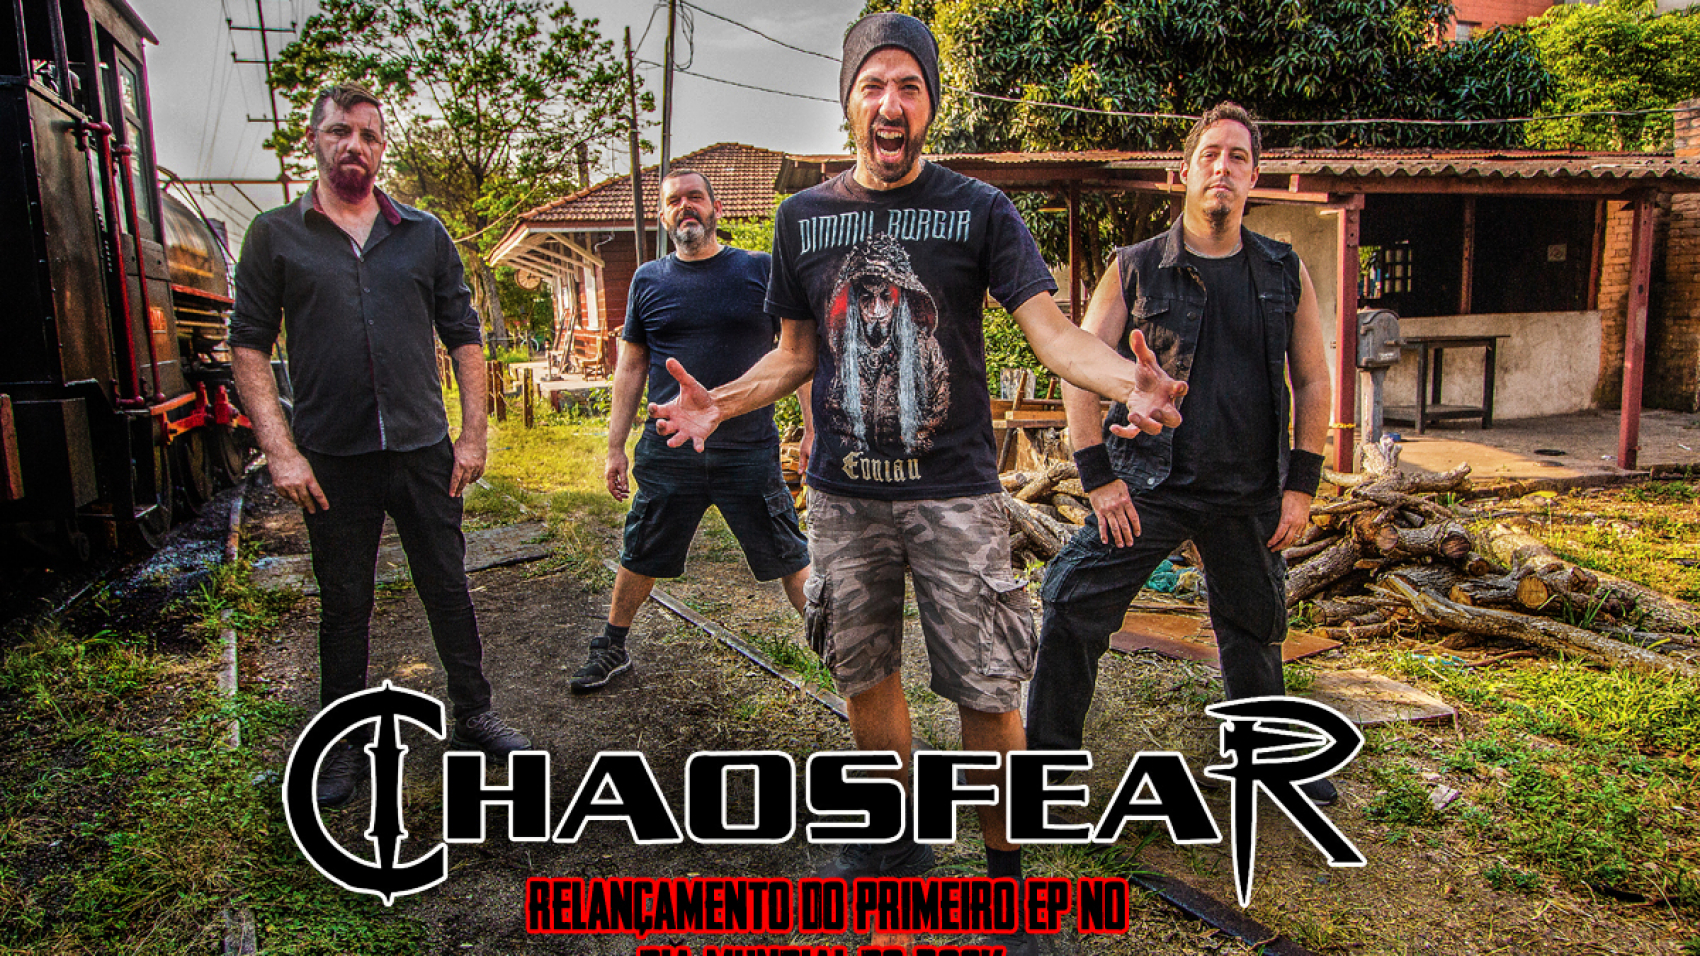 CHAOSFEAR re-releases their first EP